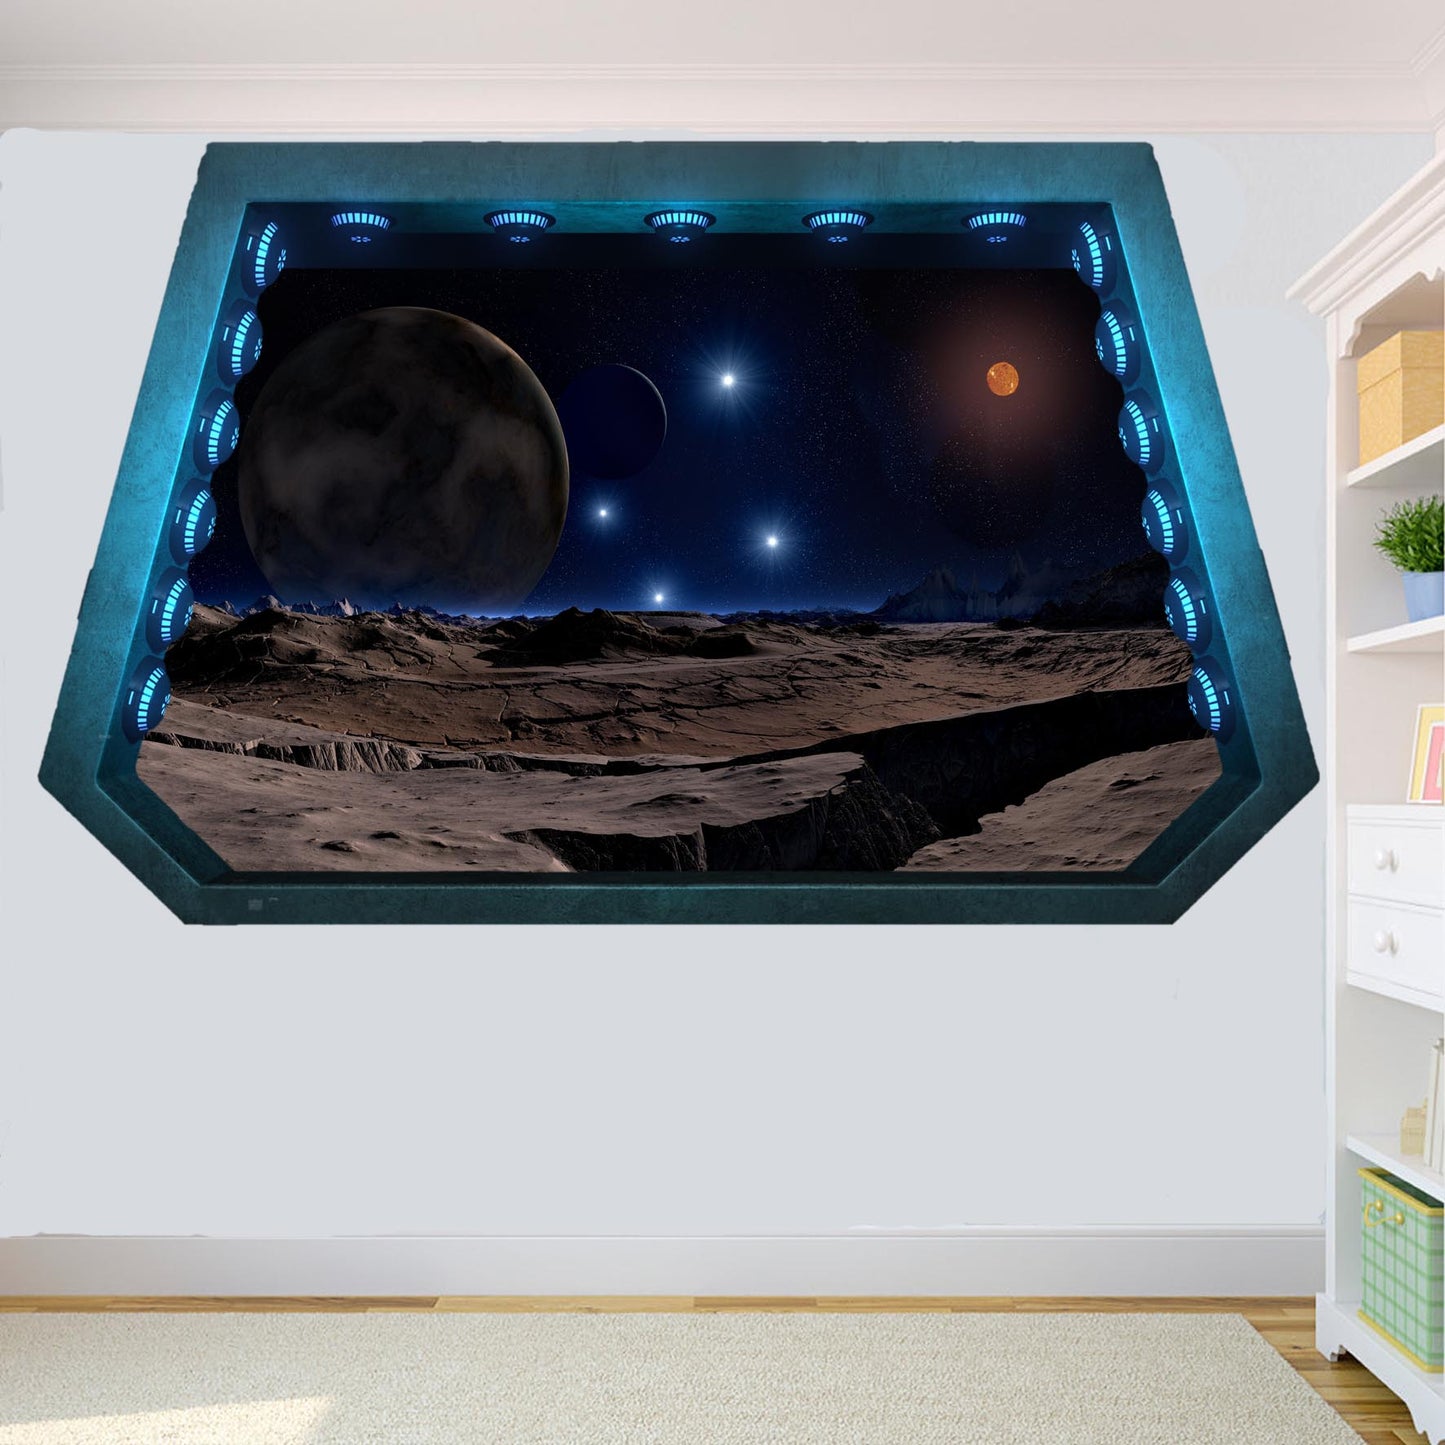 Galactic Wonder Space Wall Sticker Decal Mural Poster for Cosmic Bedroom Decor RJ6